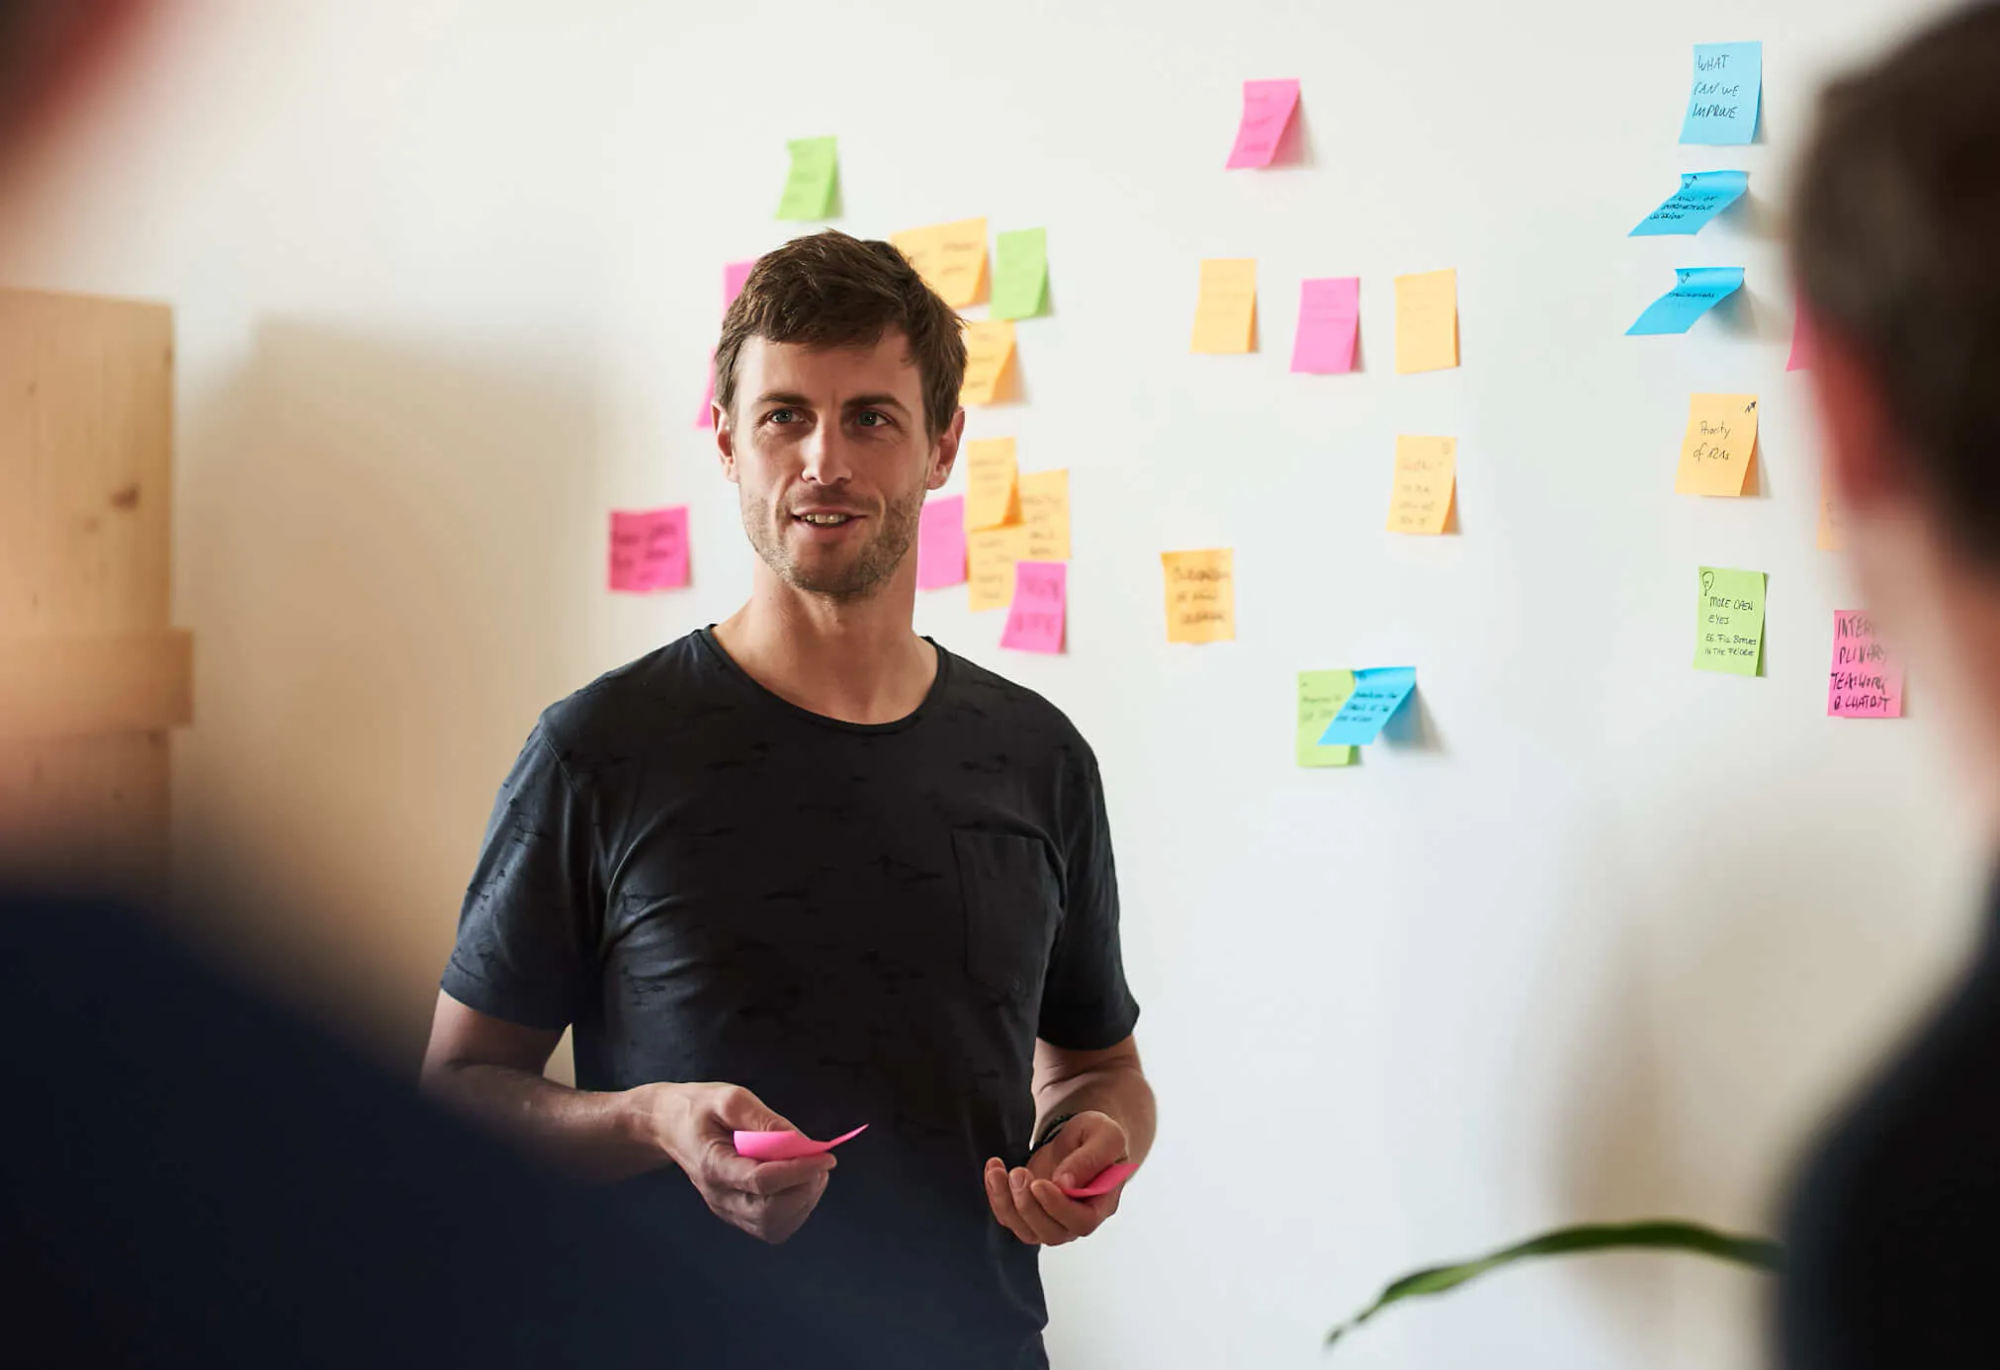 A man standing in front of a wall covered in colorful sticky notes, representing ideas and reminders.